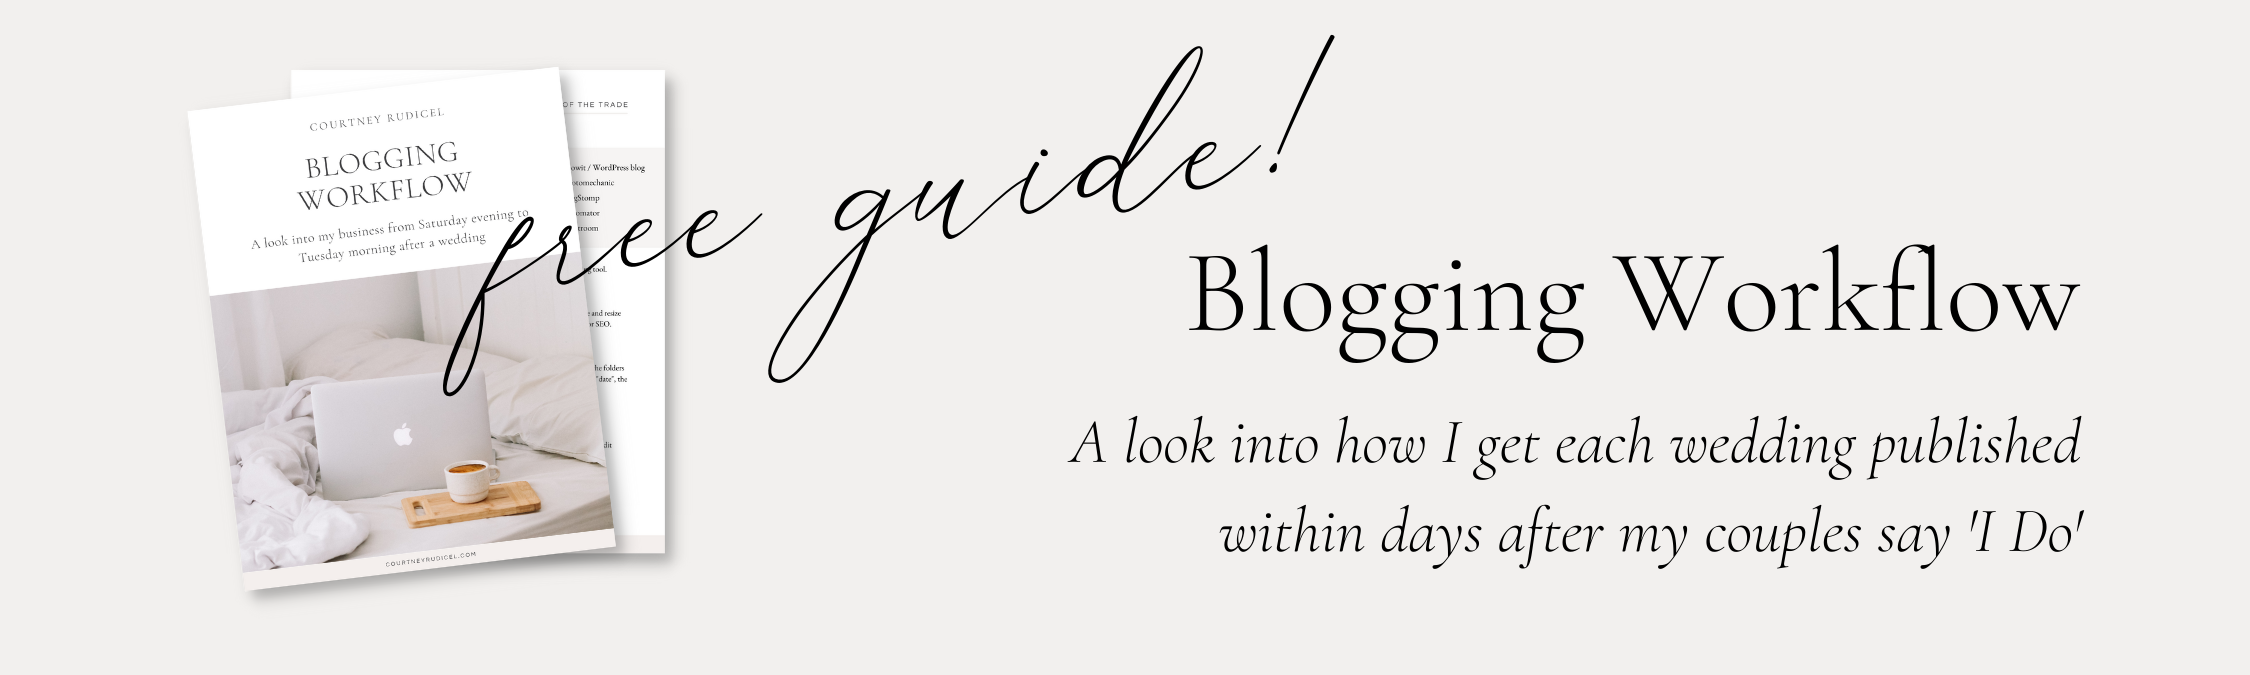 Free Guide for Photographers Blogging Workflow Courtney Rudicel Photographer Education